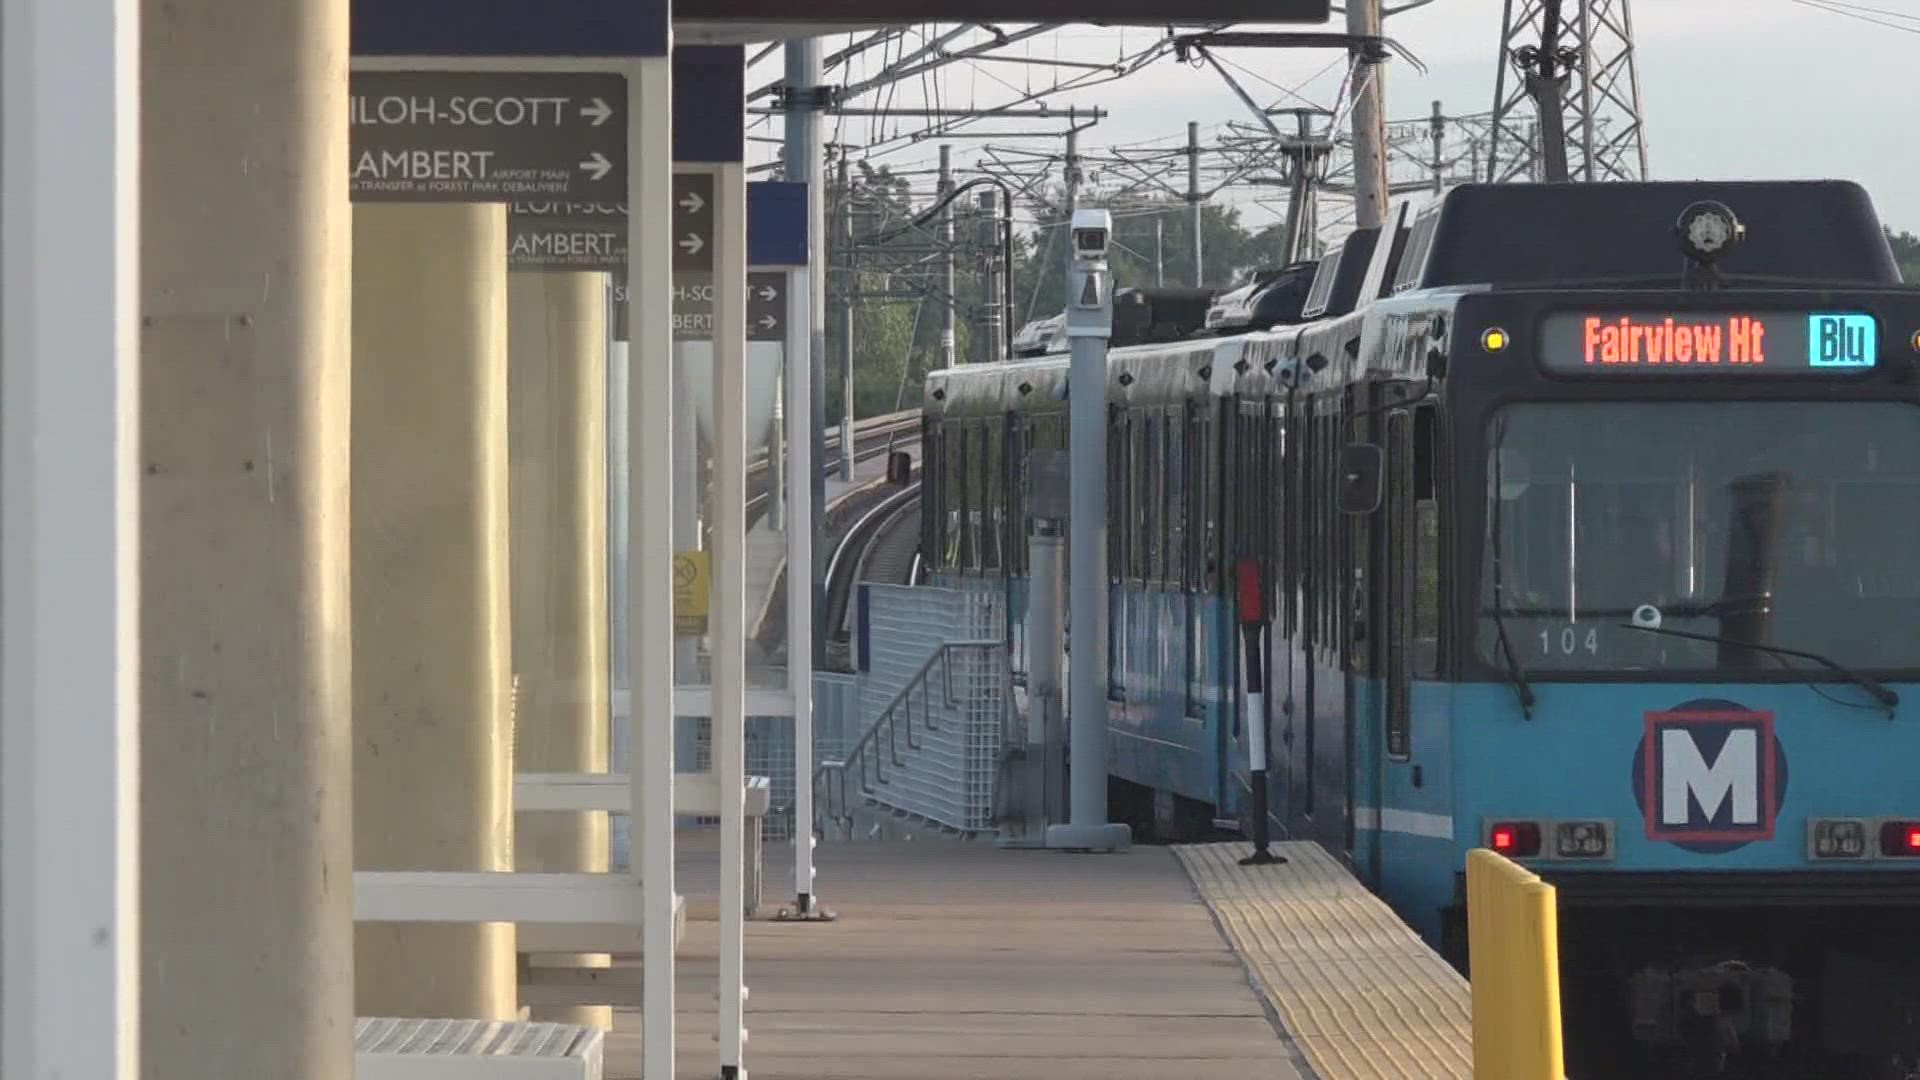 Officials are considering pairing mental health services with security on the MetroLink. They hope it will improve safety and cut down on violence.